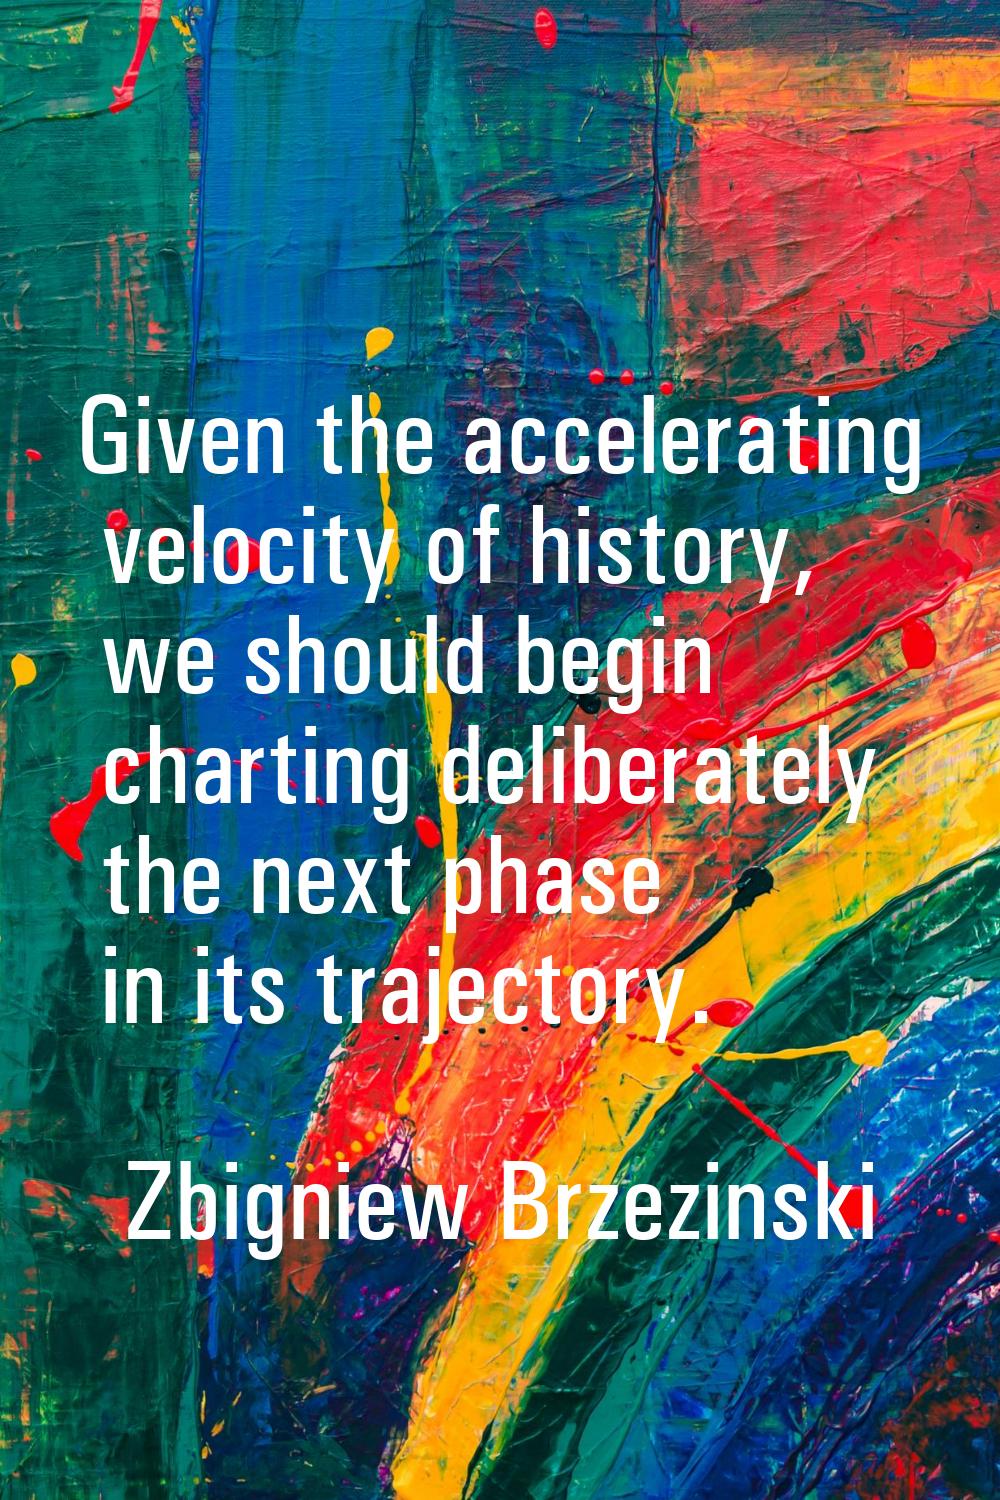 Given the accelerating velocity of history, we should begin charting deliberately the next phase in